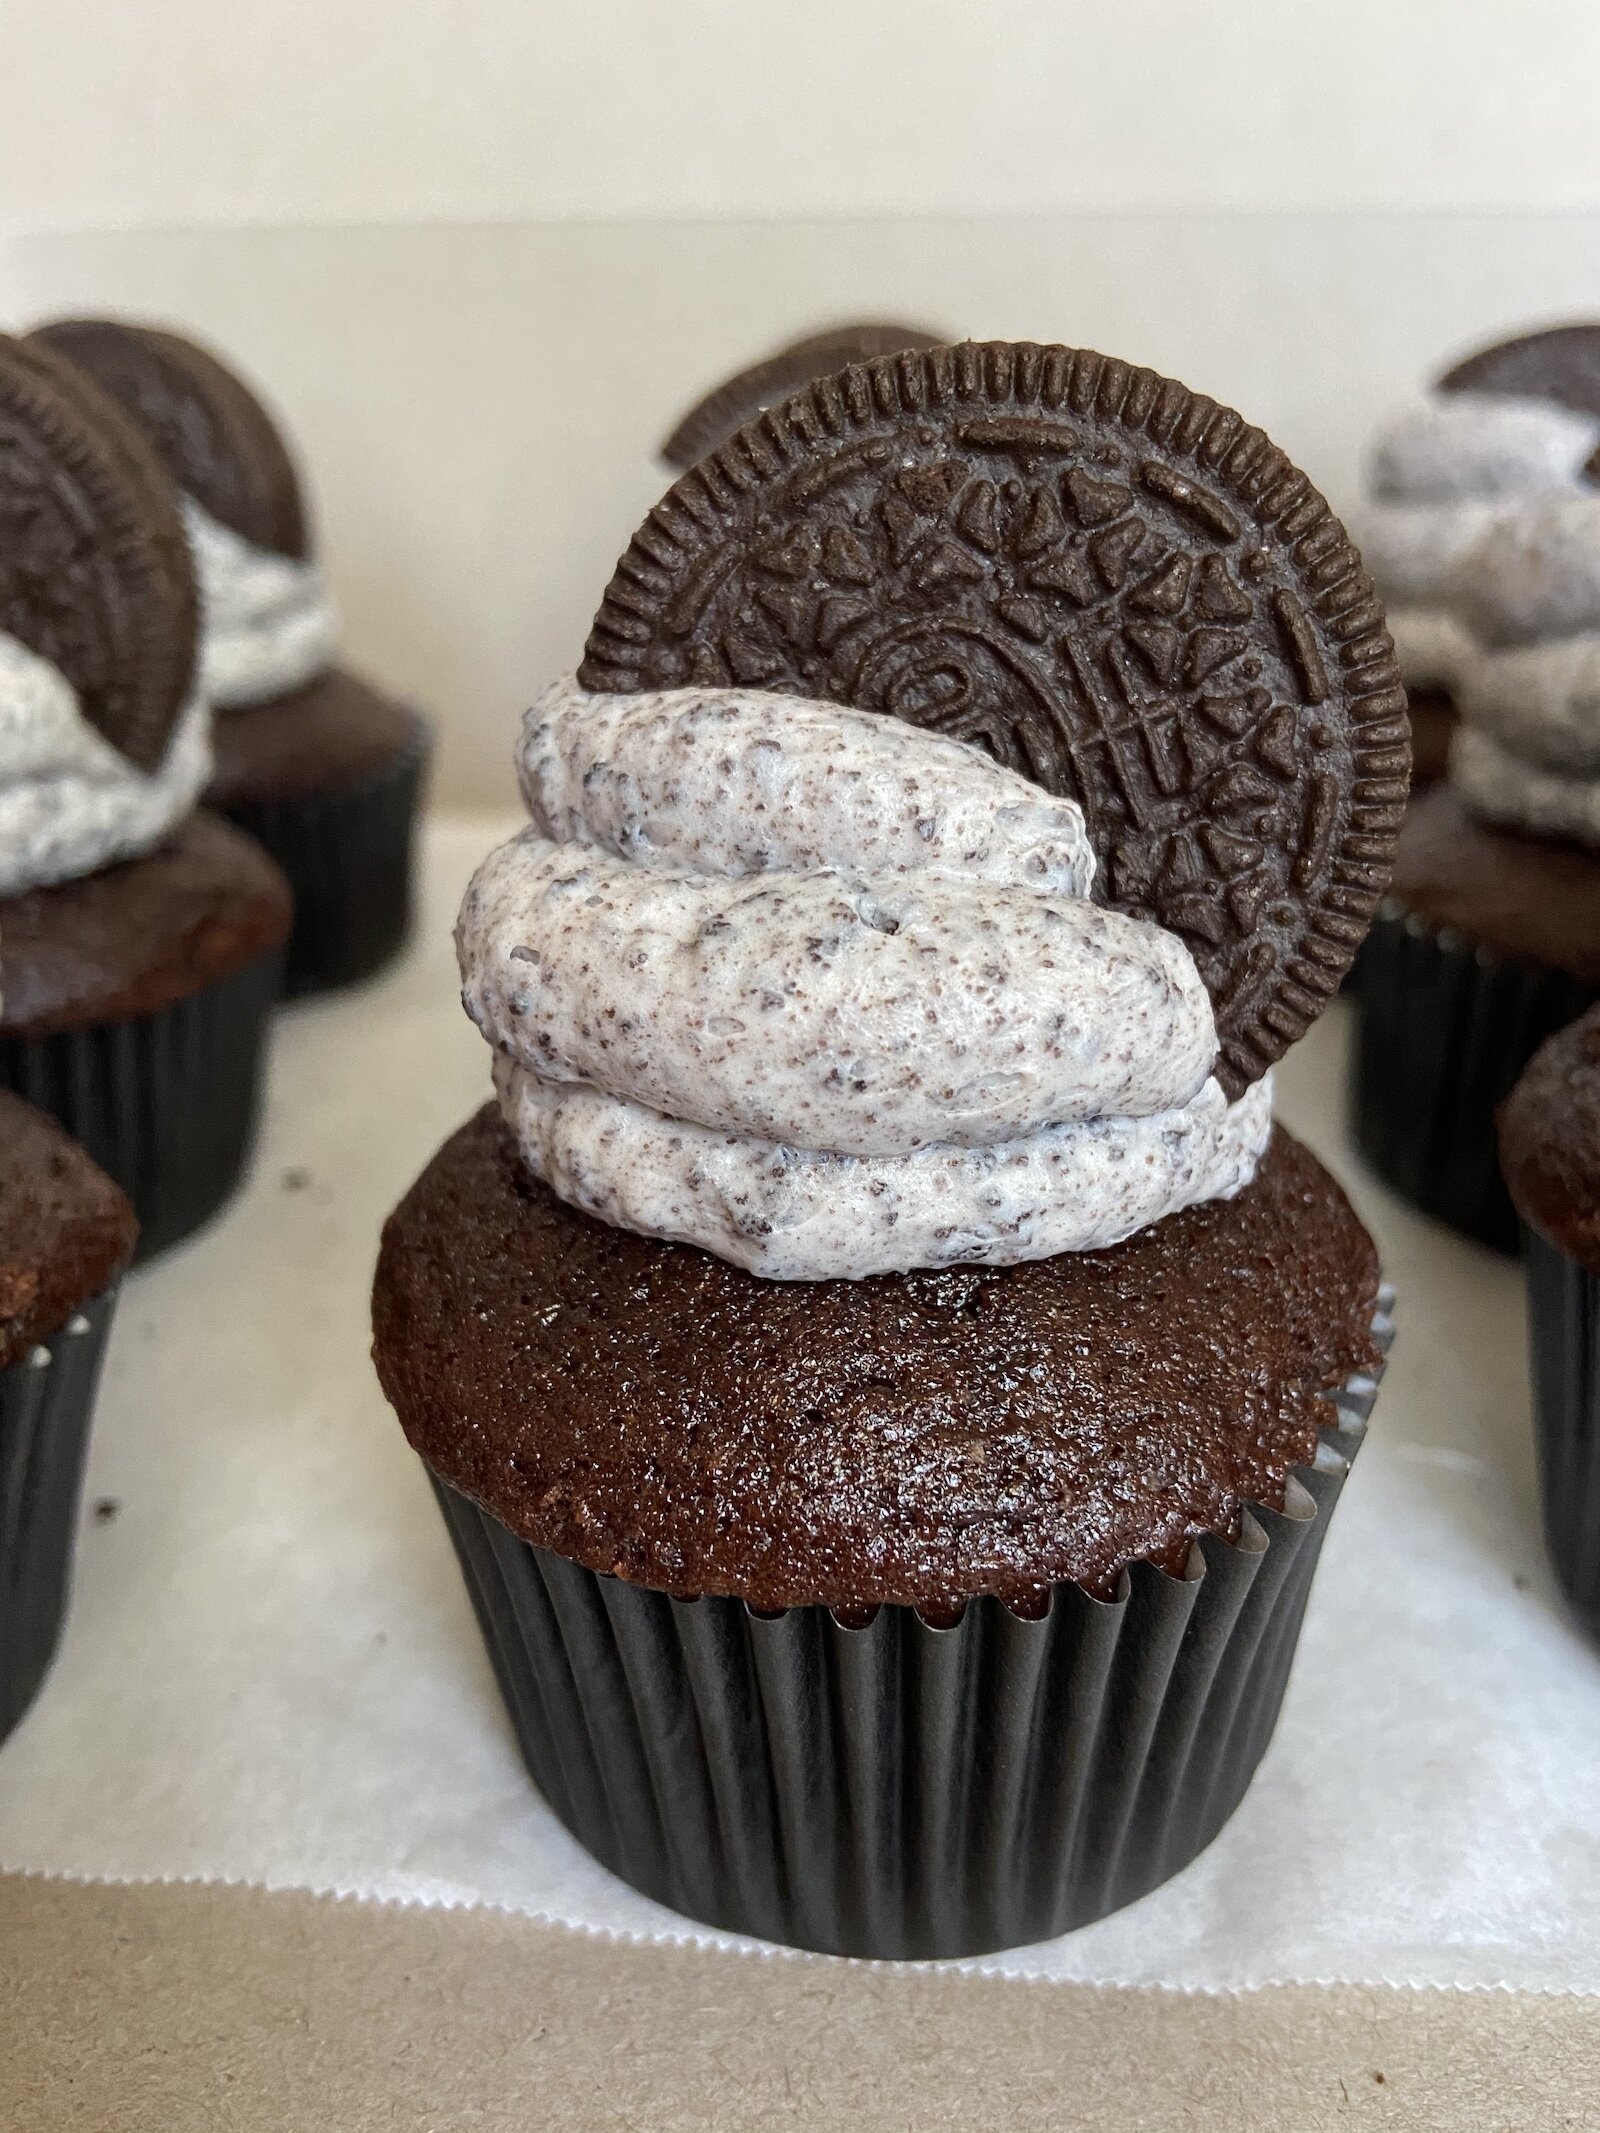 A cookies n' cream cupcake, made by Puff's Pastries.